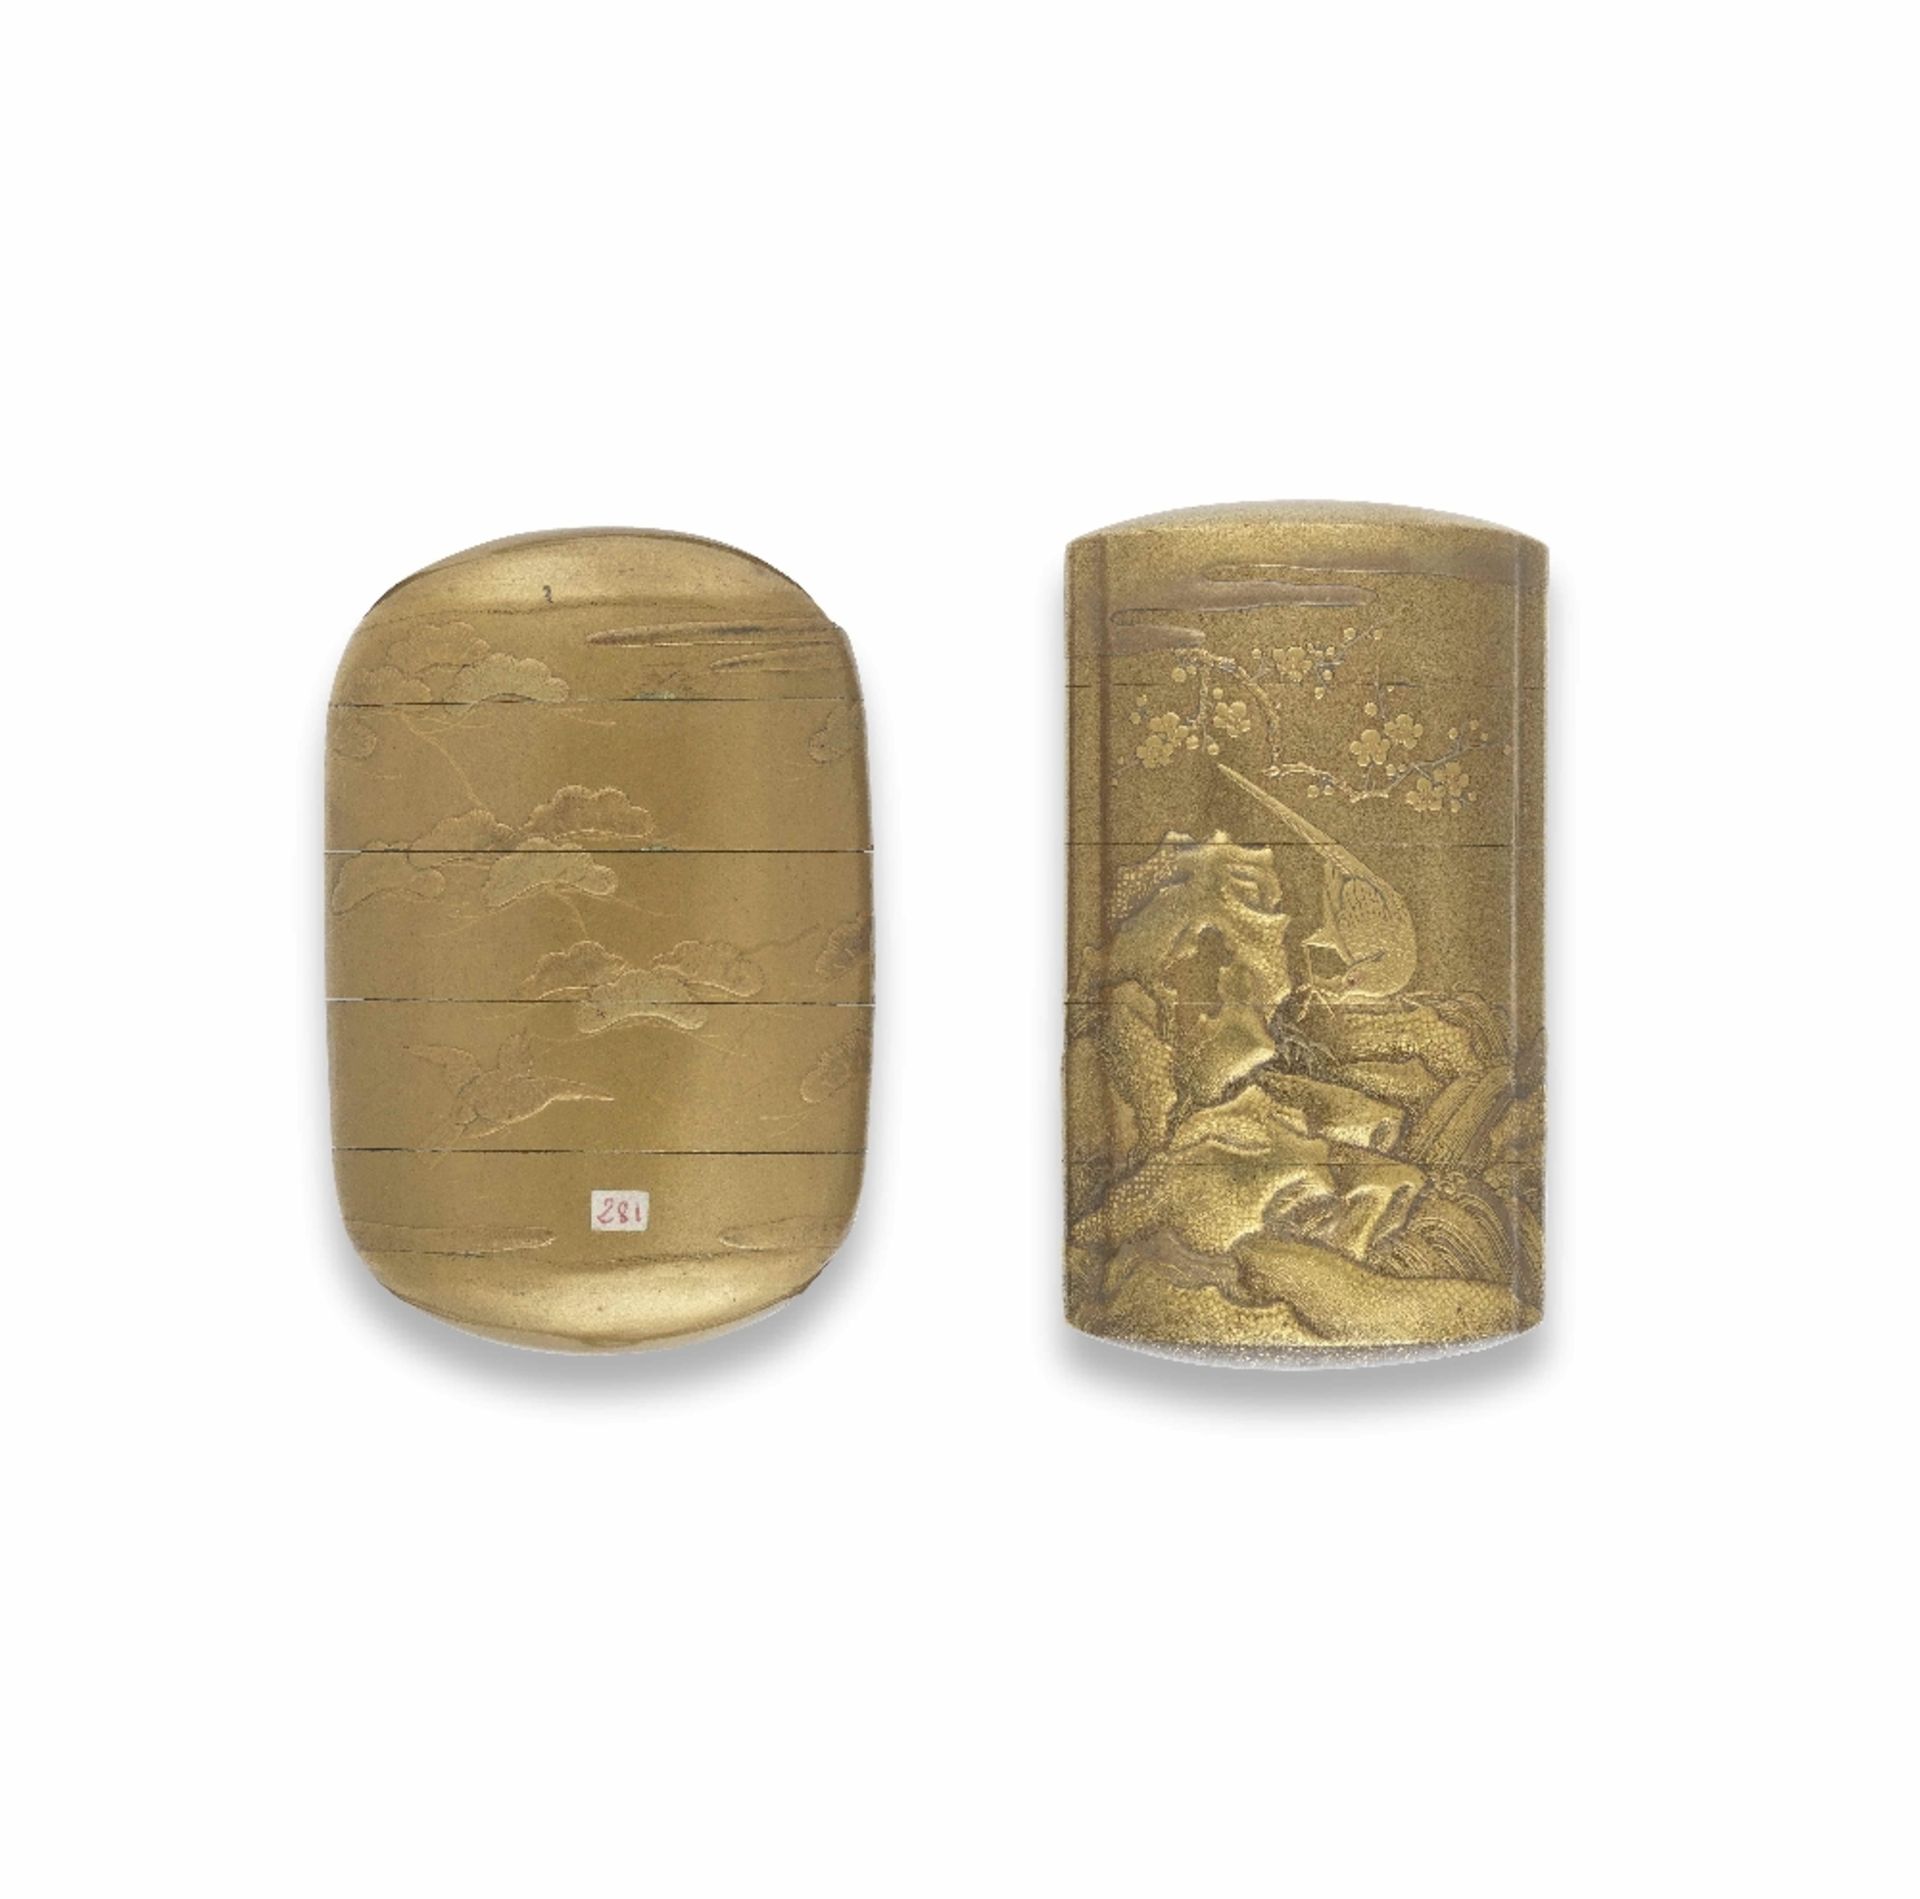 TWO GOLD-LACQUER FOUR-CASE INRO One by Kakosai, Edo period (1615-1868), 19th century (2) - Image 2 of 2